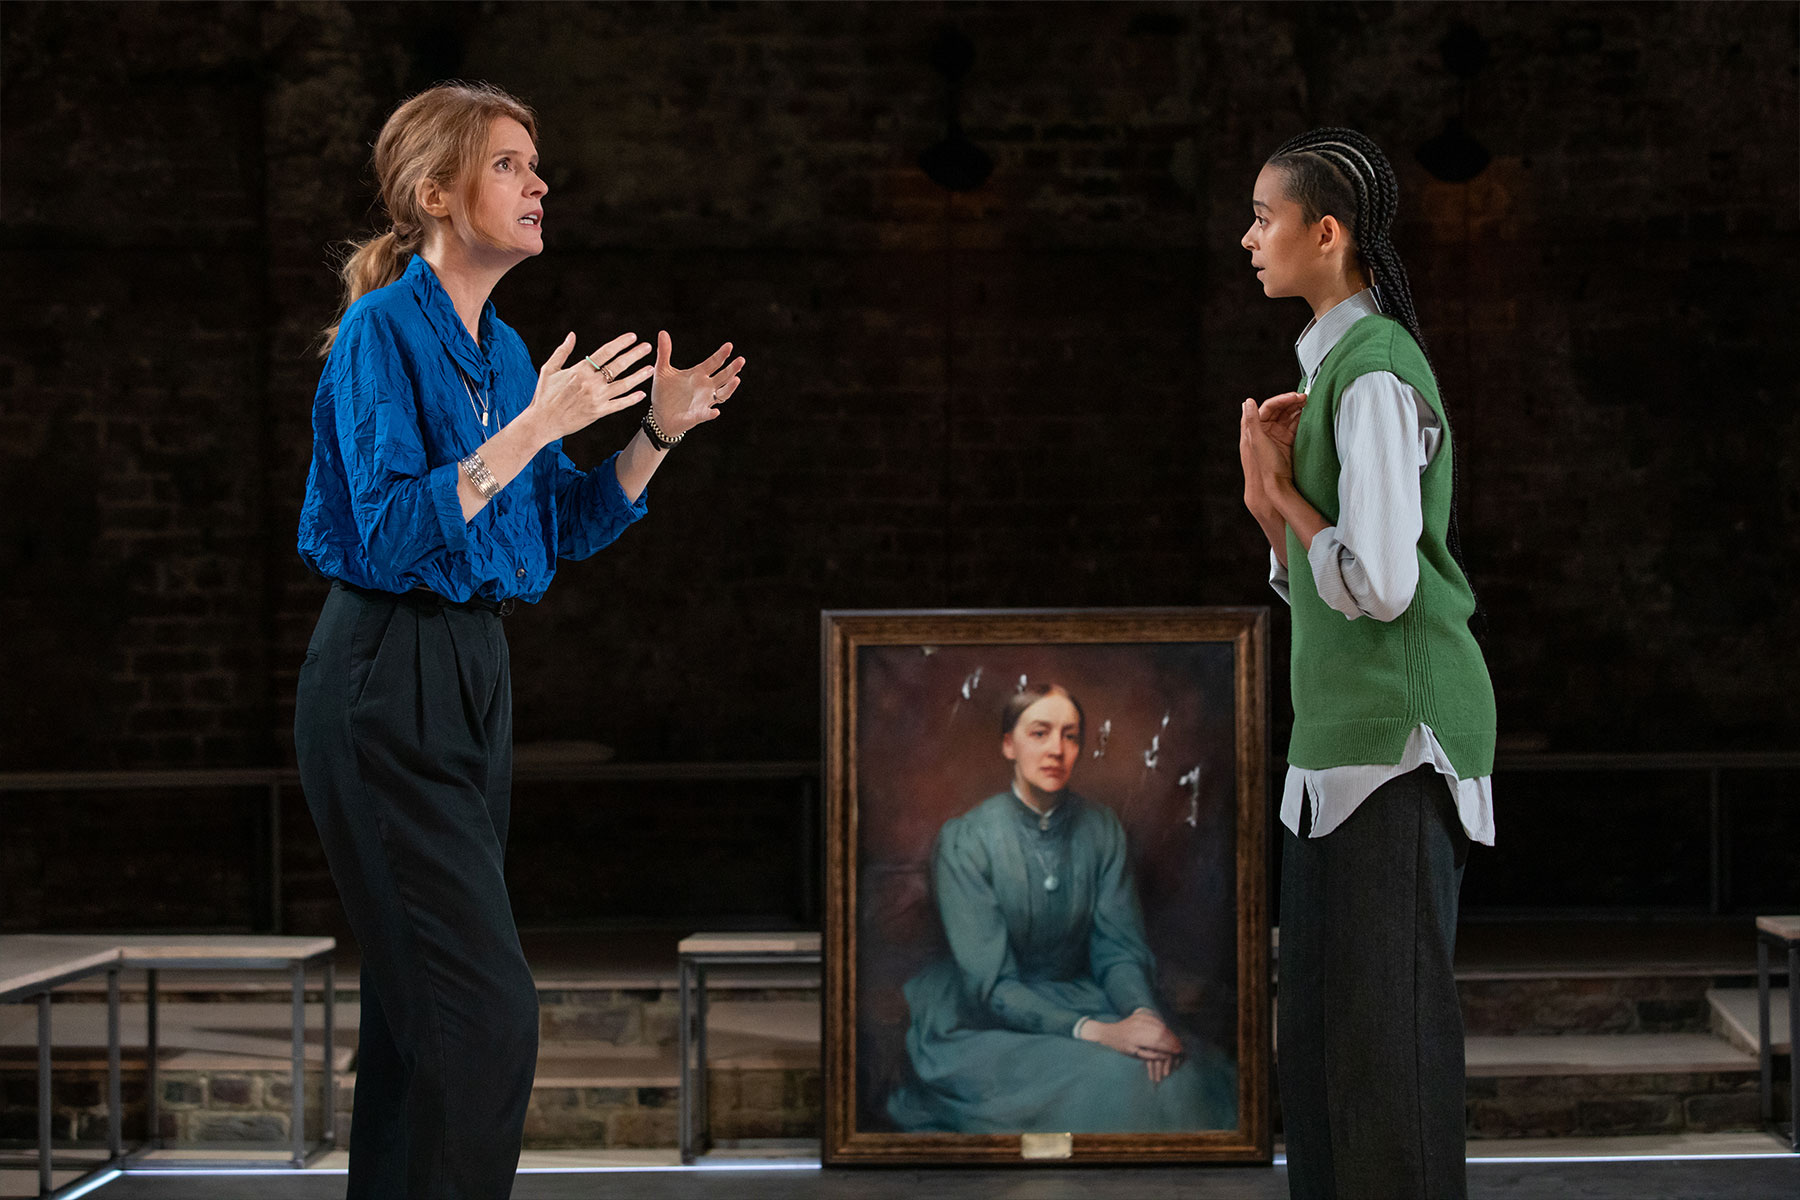 Justine Mitchell and Phoebe Campbell in a scene from Alma Mater at the Almeida Theatre